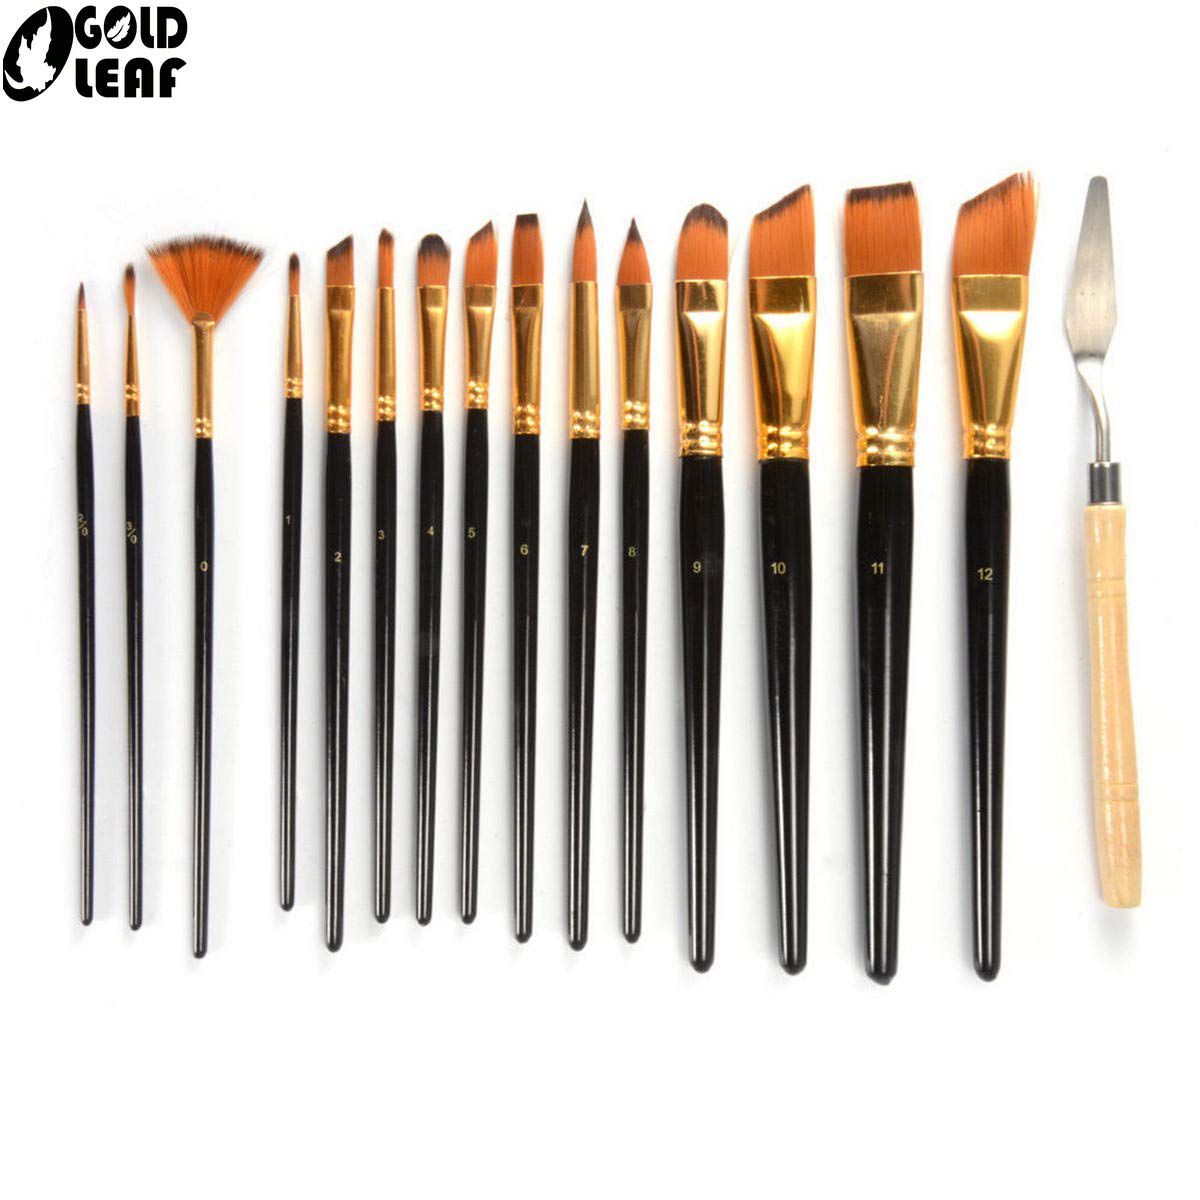 Shop Online in India Gold Leaf Gilding Tools in India